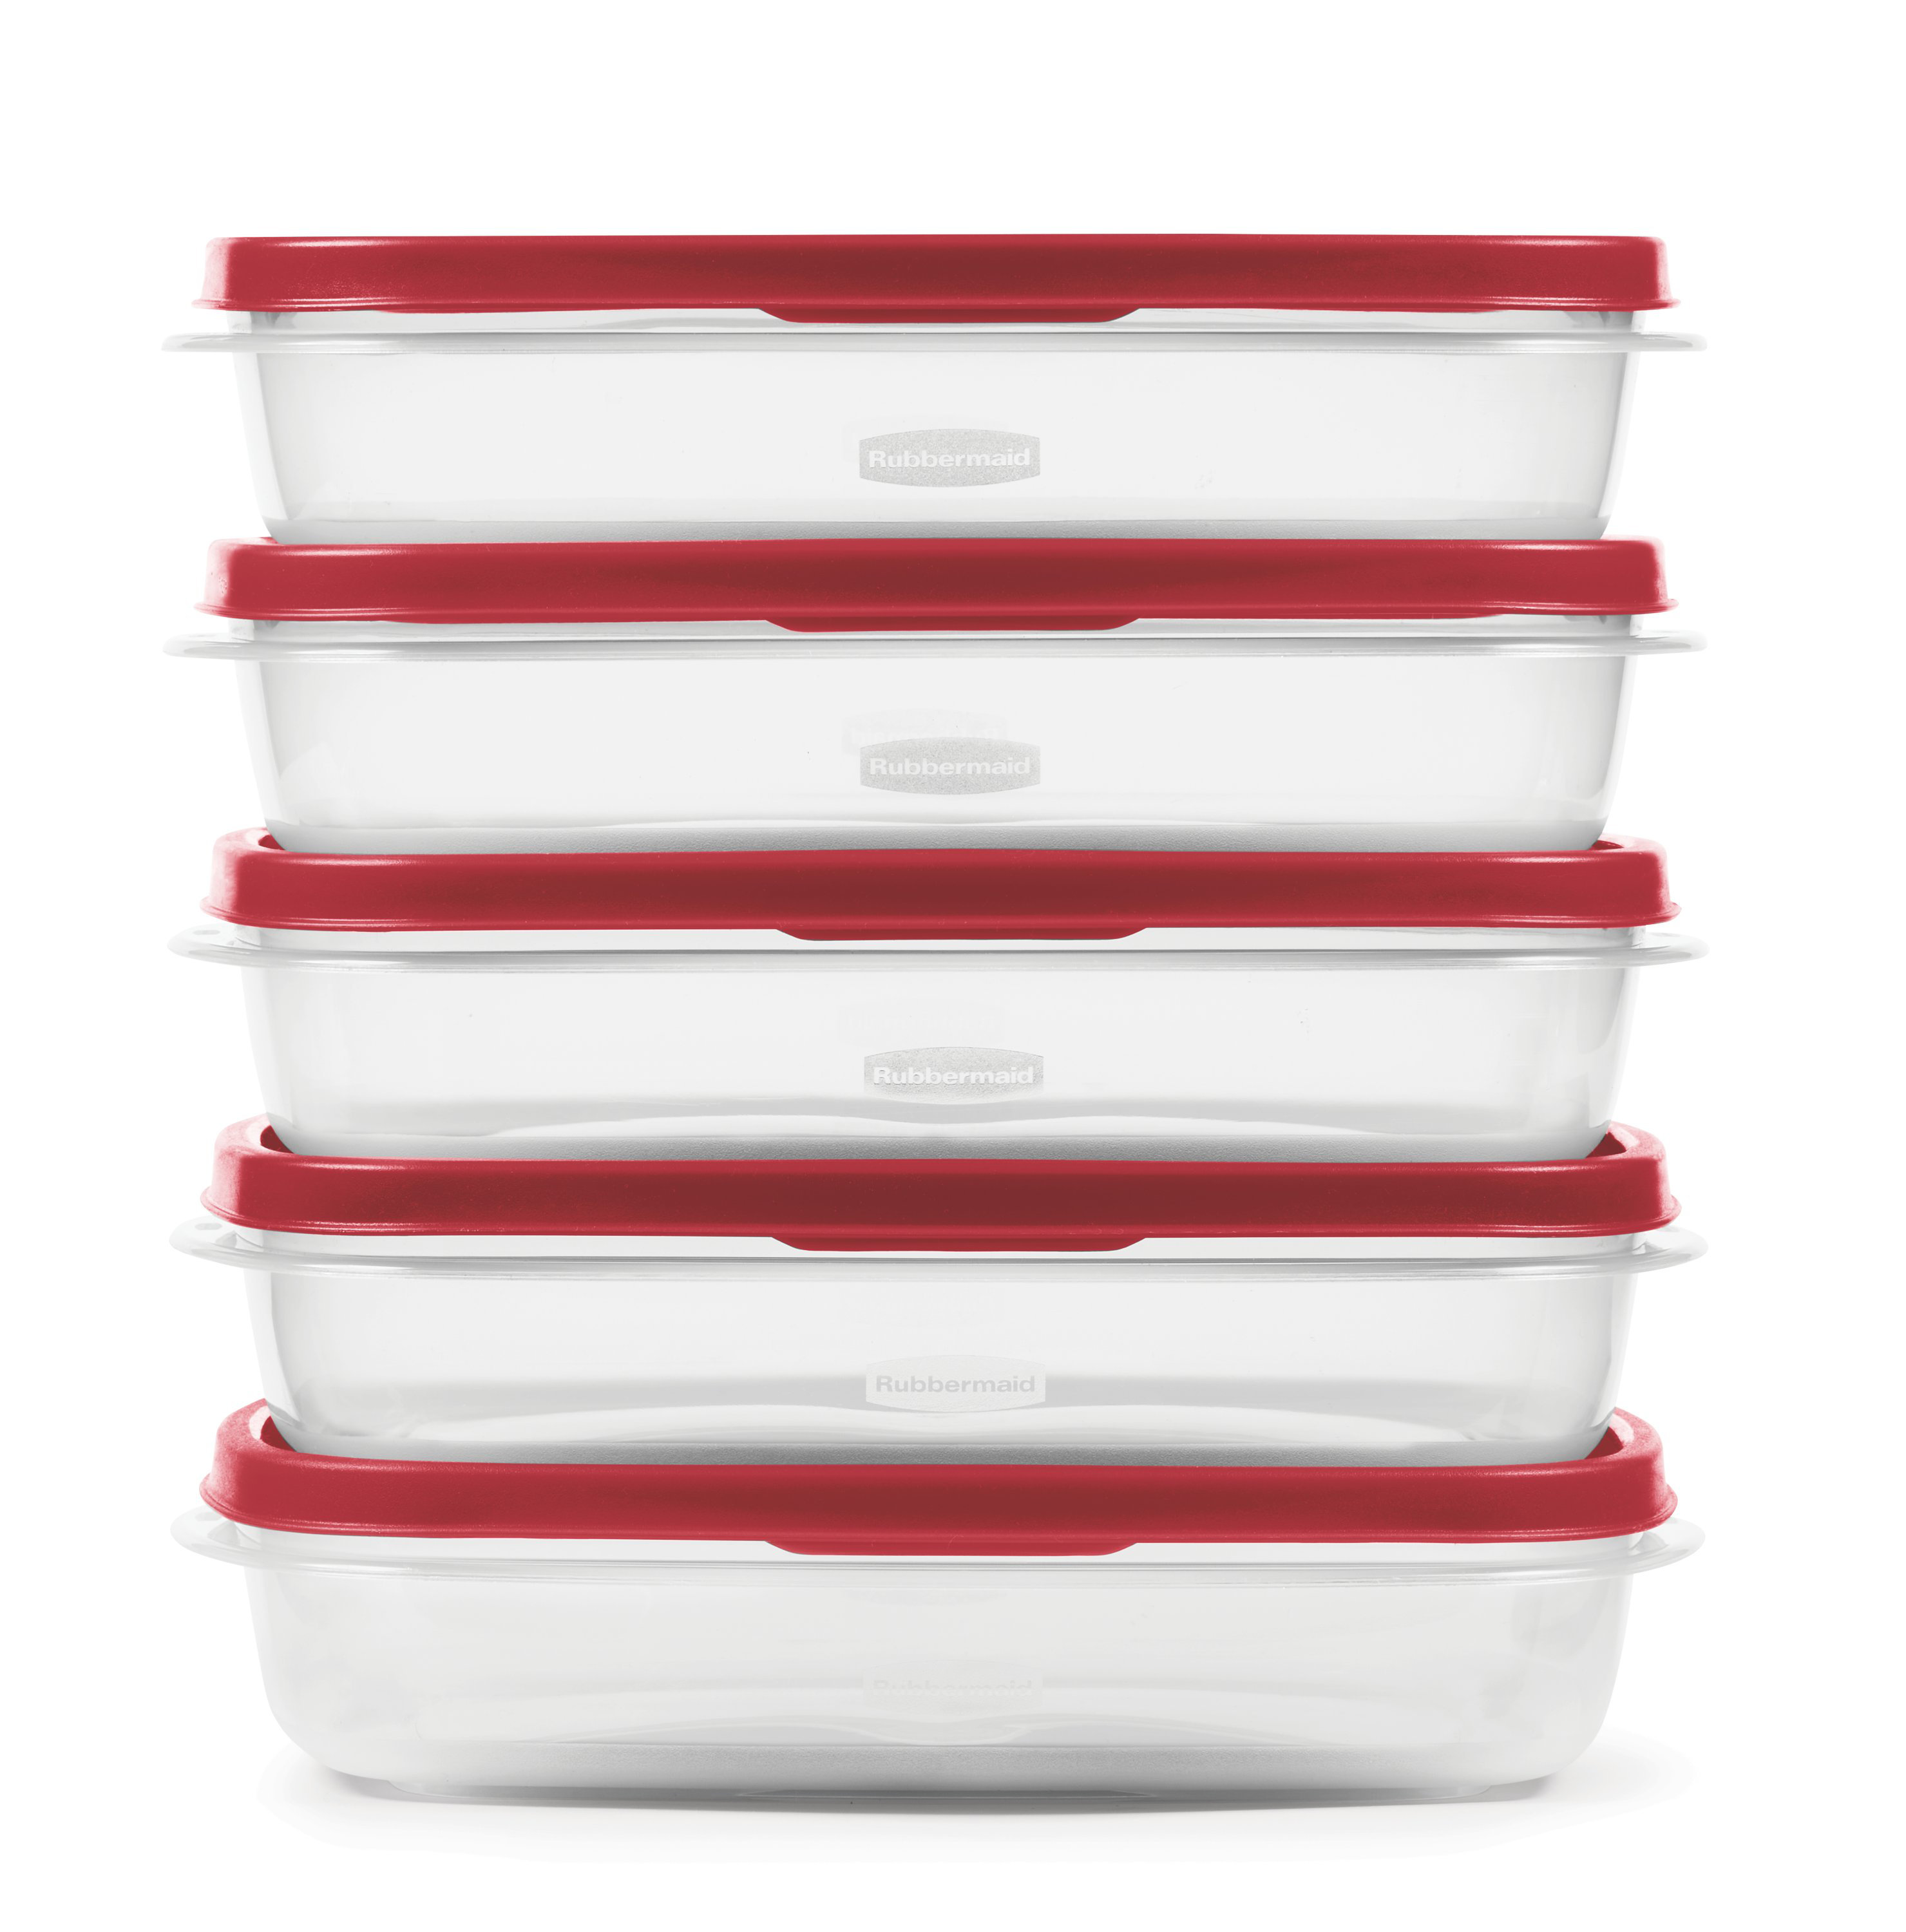 Save on Rubbermaid Easy Find Lids Container & Lid 9 & 14 Cup Value